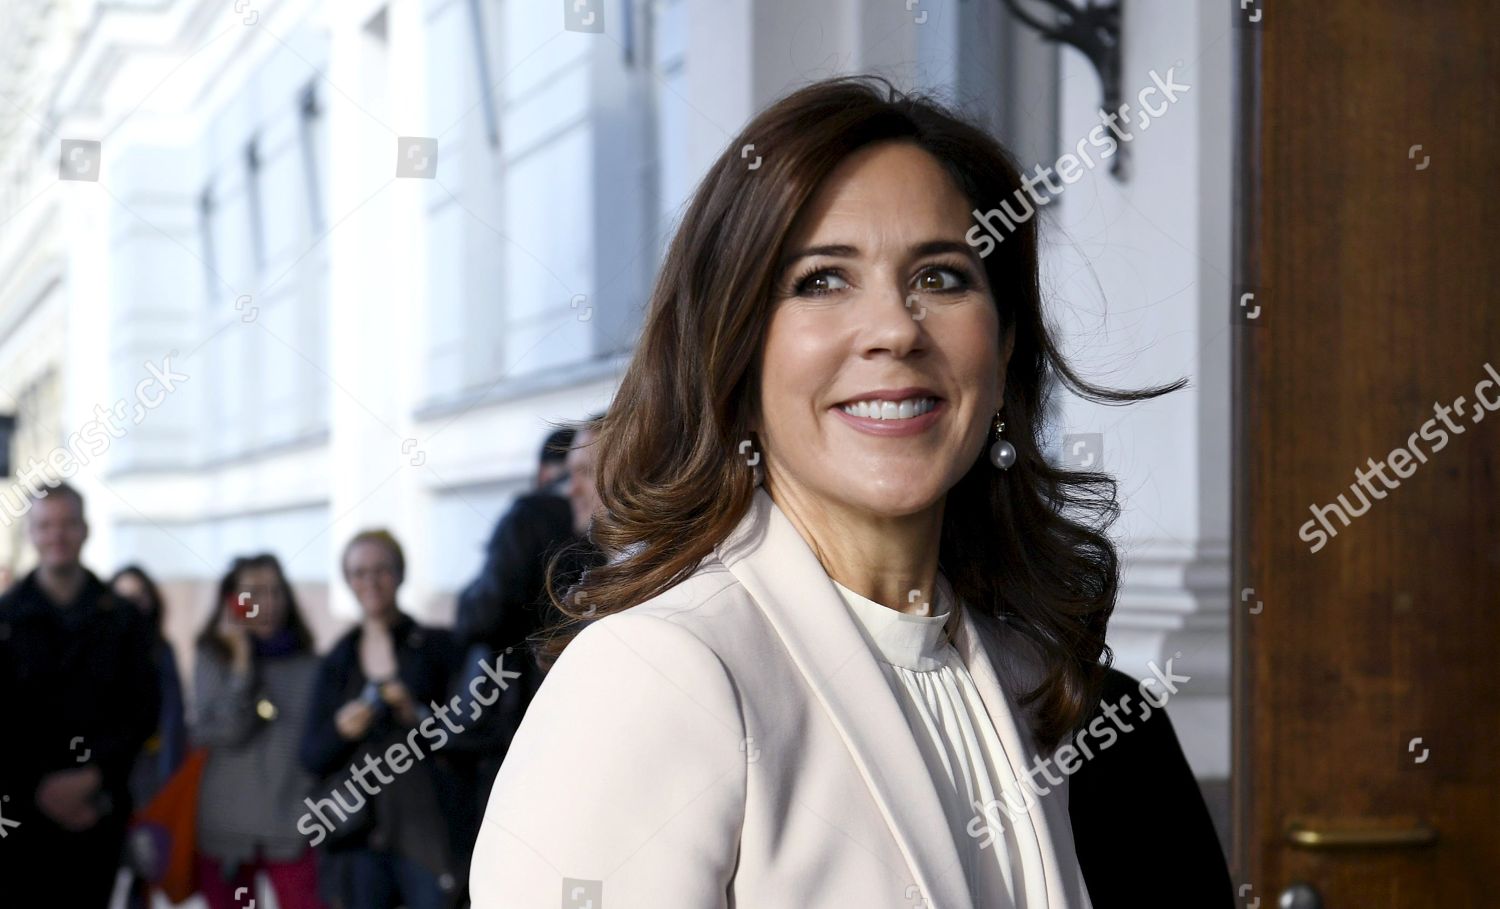 crown-princess-mary-visit-to-finland-shutterstock-editorial-9881096b.jpg